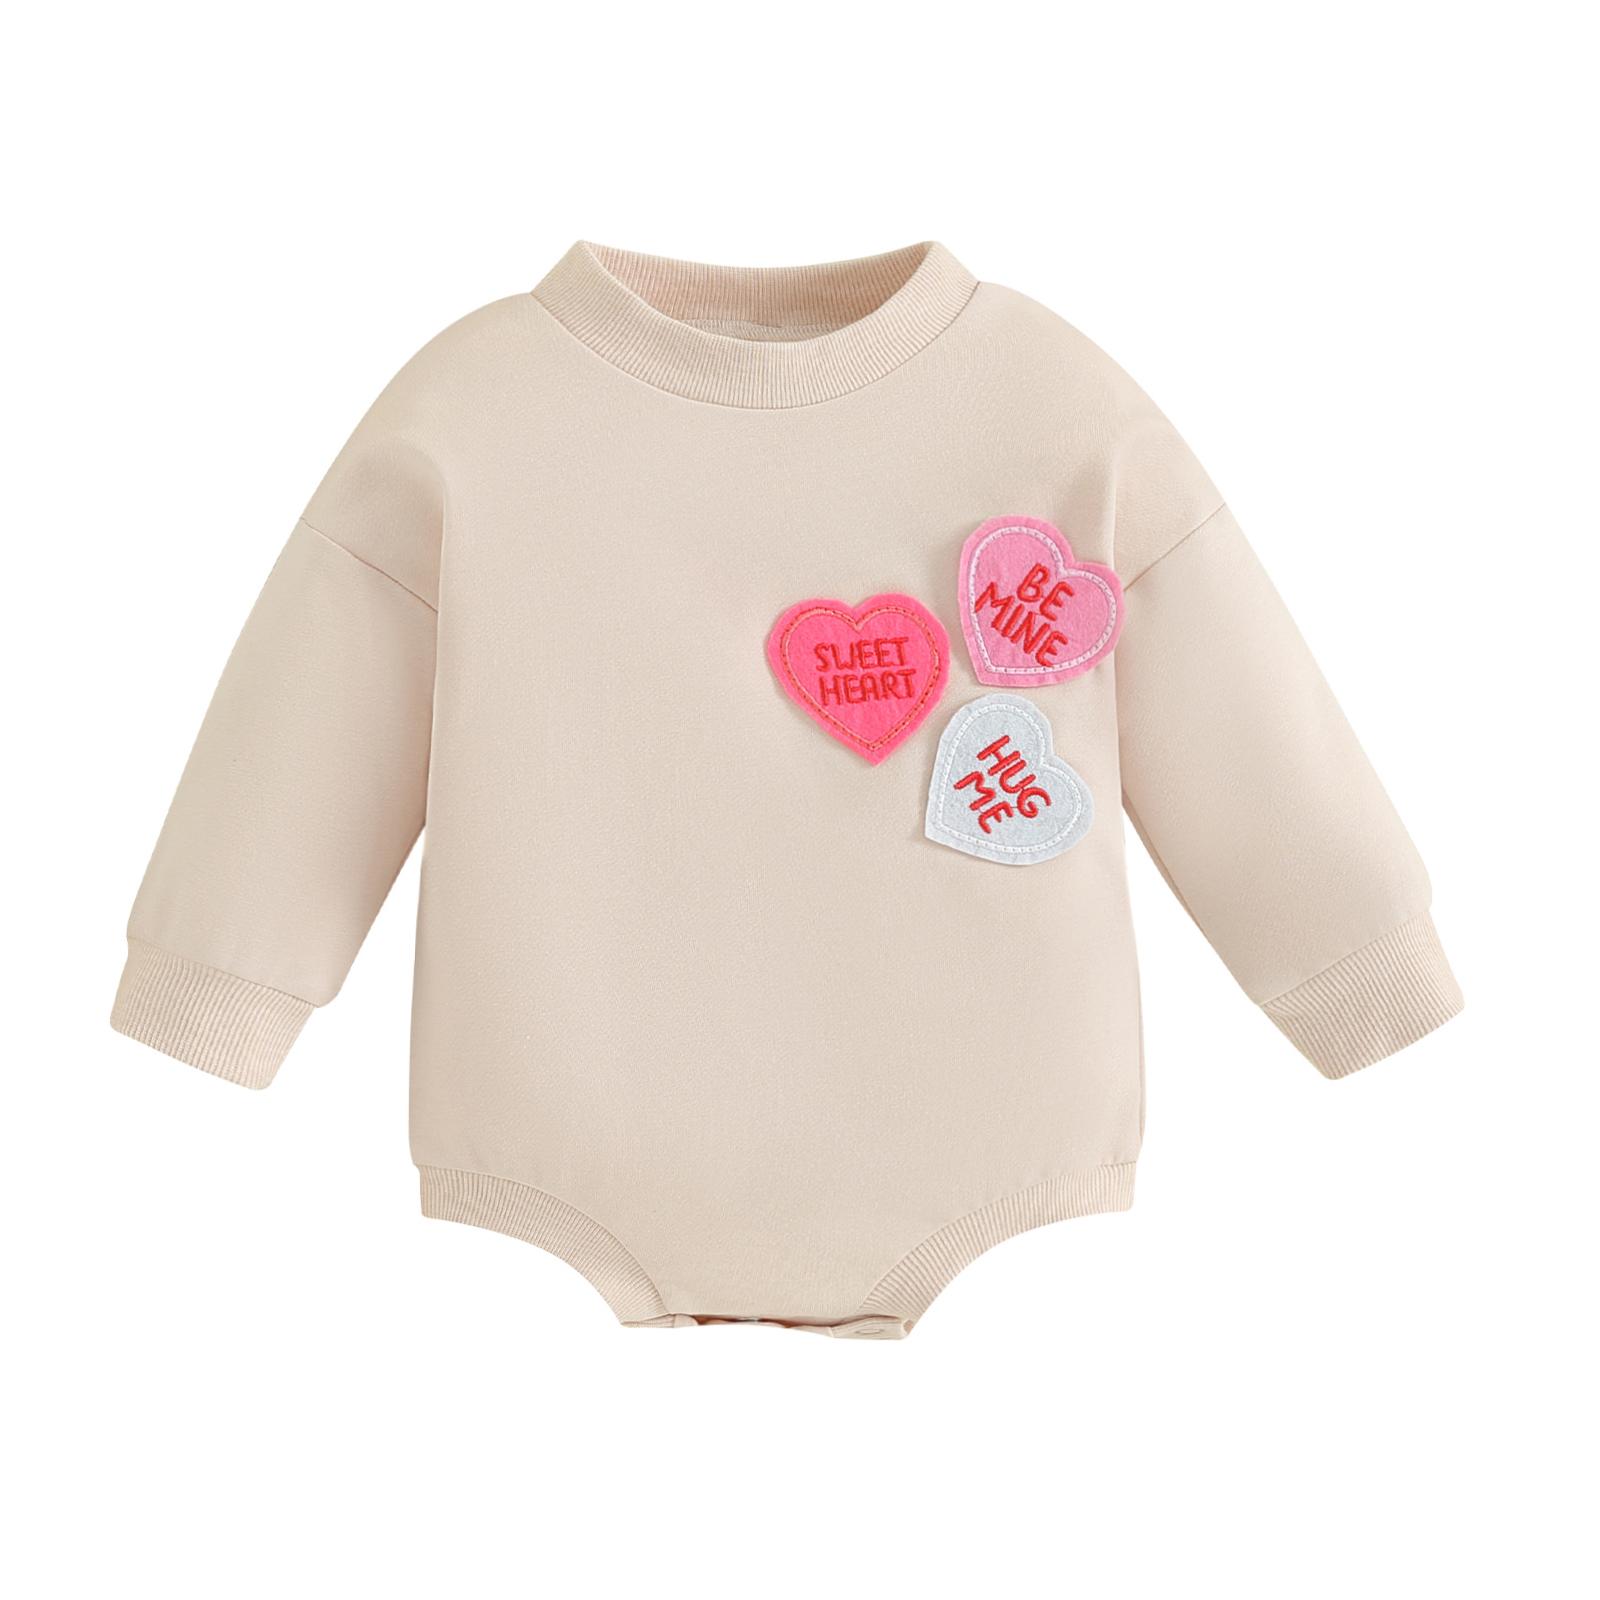 Little Fashionistas Baby Girls Sweatshirts Rompers Valentine's Day Clothes 3M 6M 12M 18M Heart Embroidered Crew Neck Long Sleeve Toddler Bodysuits